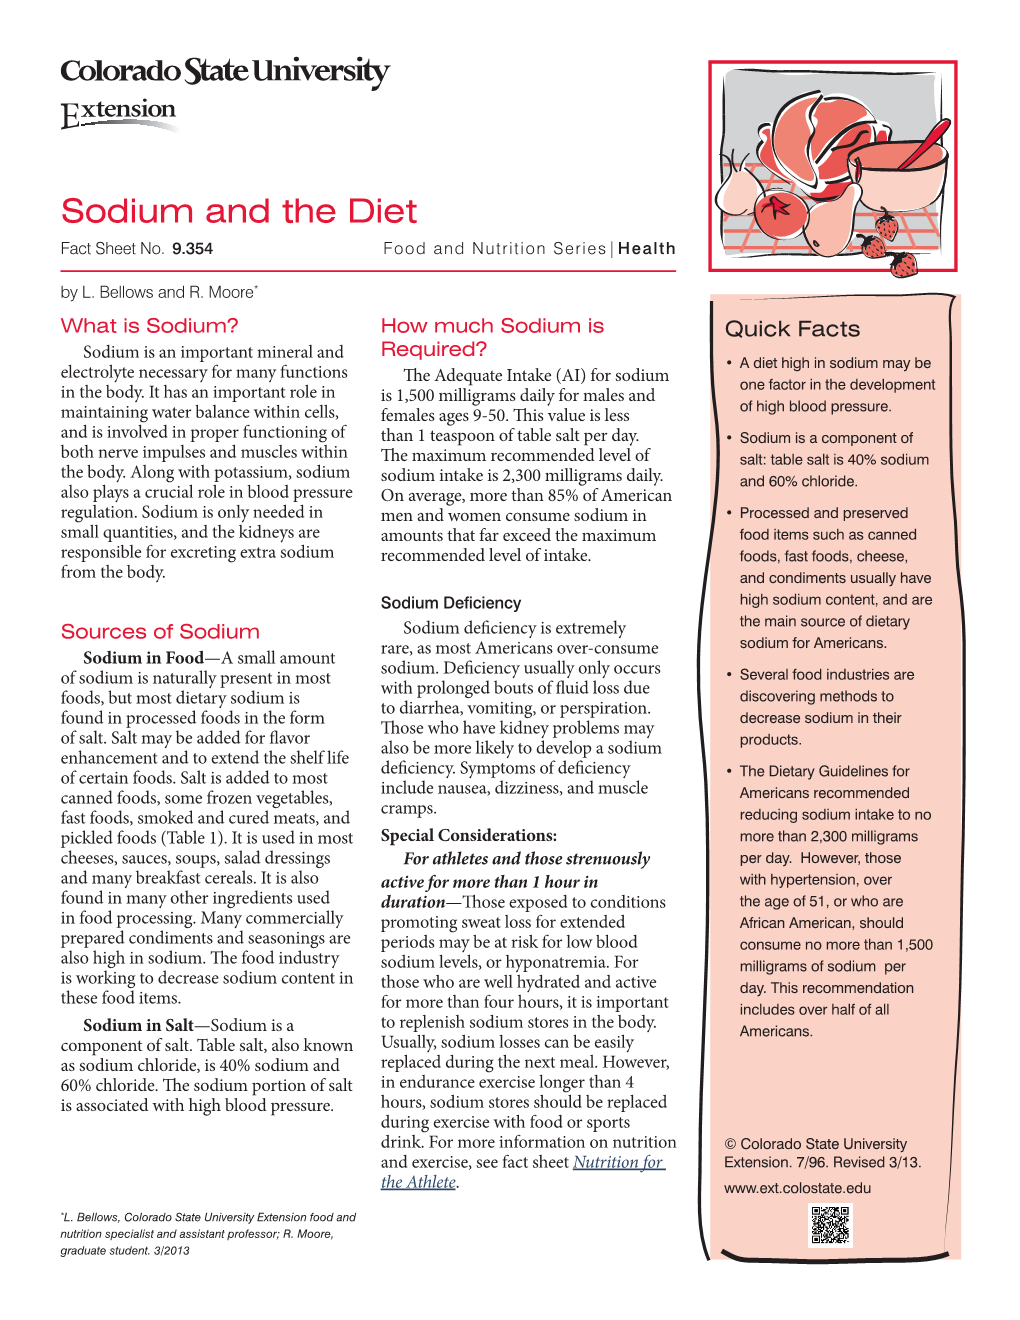 Sodium and the Diet Fact Sheet No